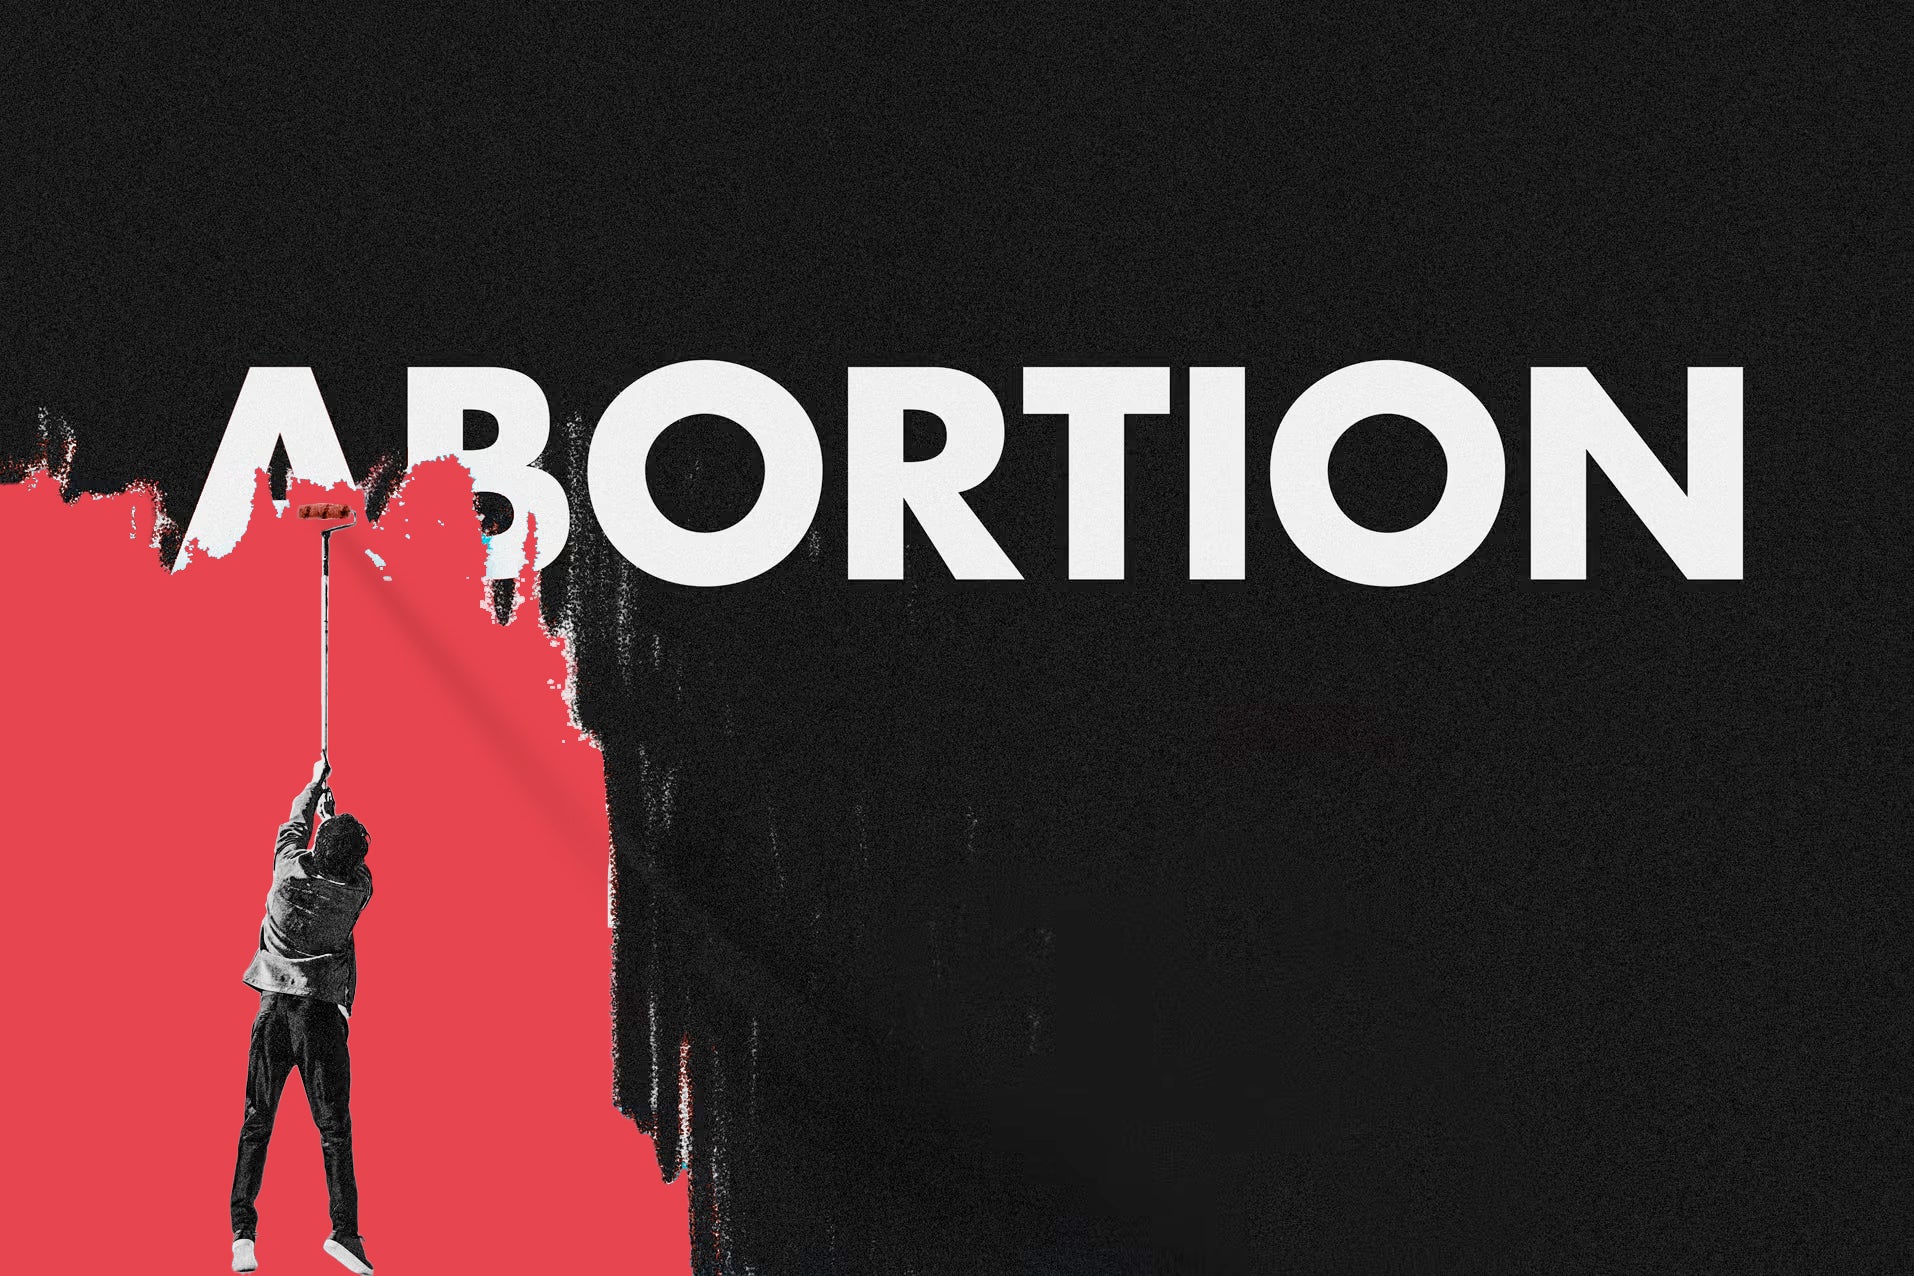 A person uses a paint roller to try to cover the word ABORTION with red paint.